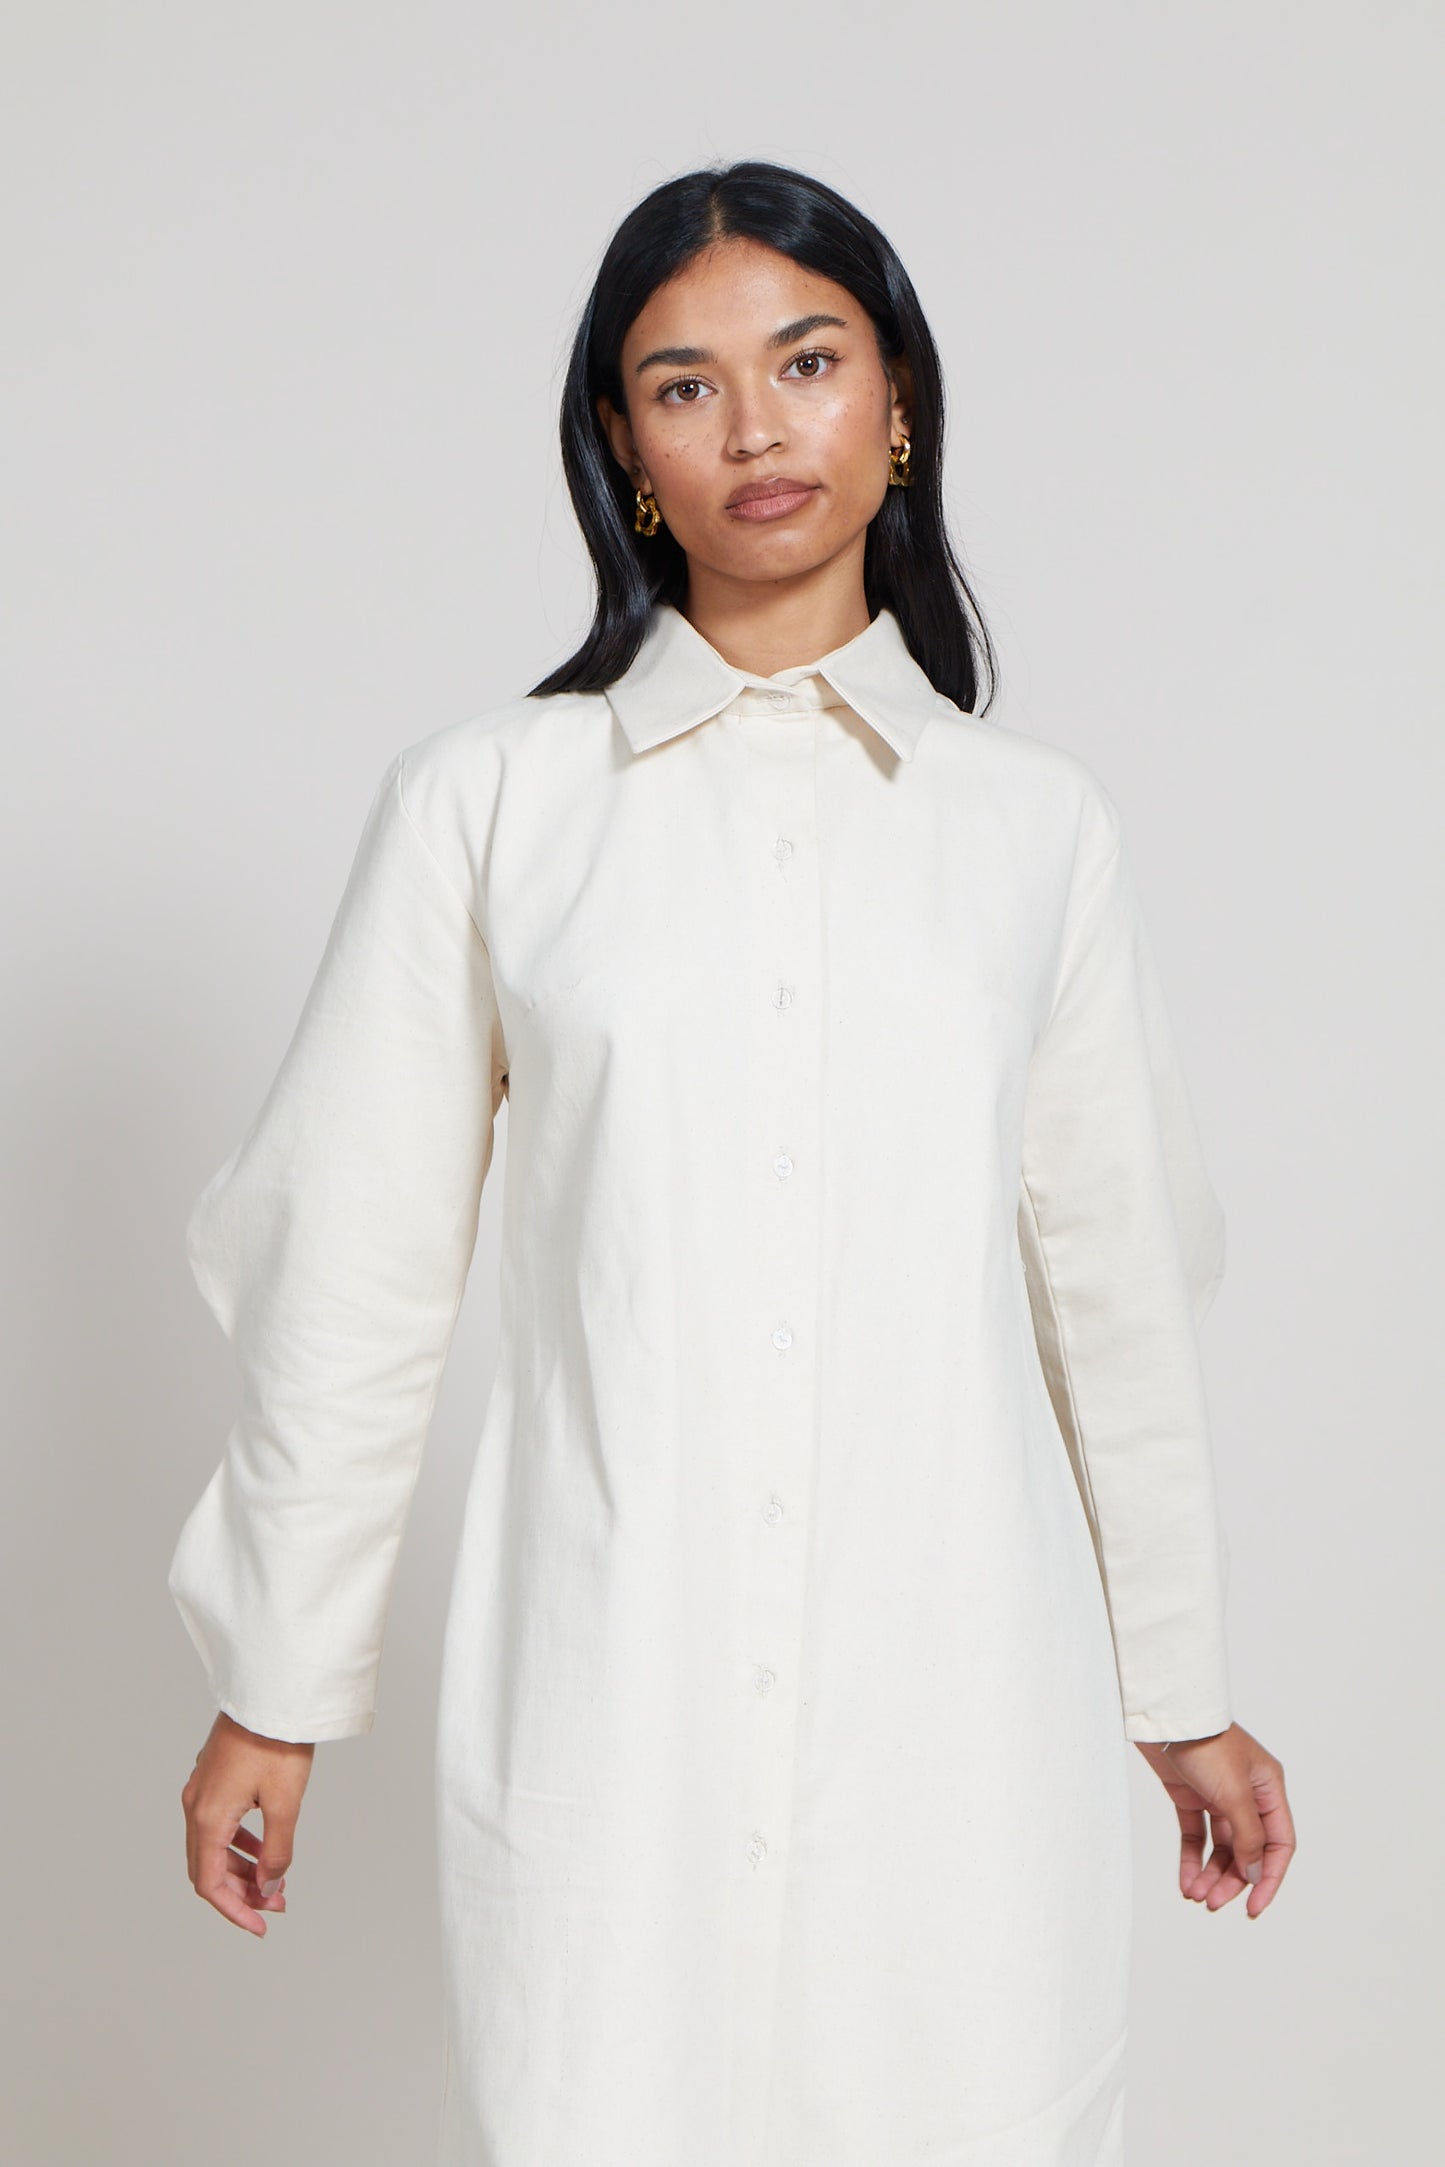 The Two Wave Sleeve Shirt Dress